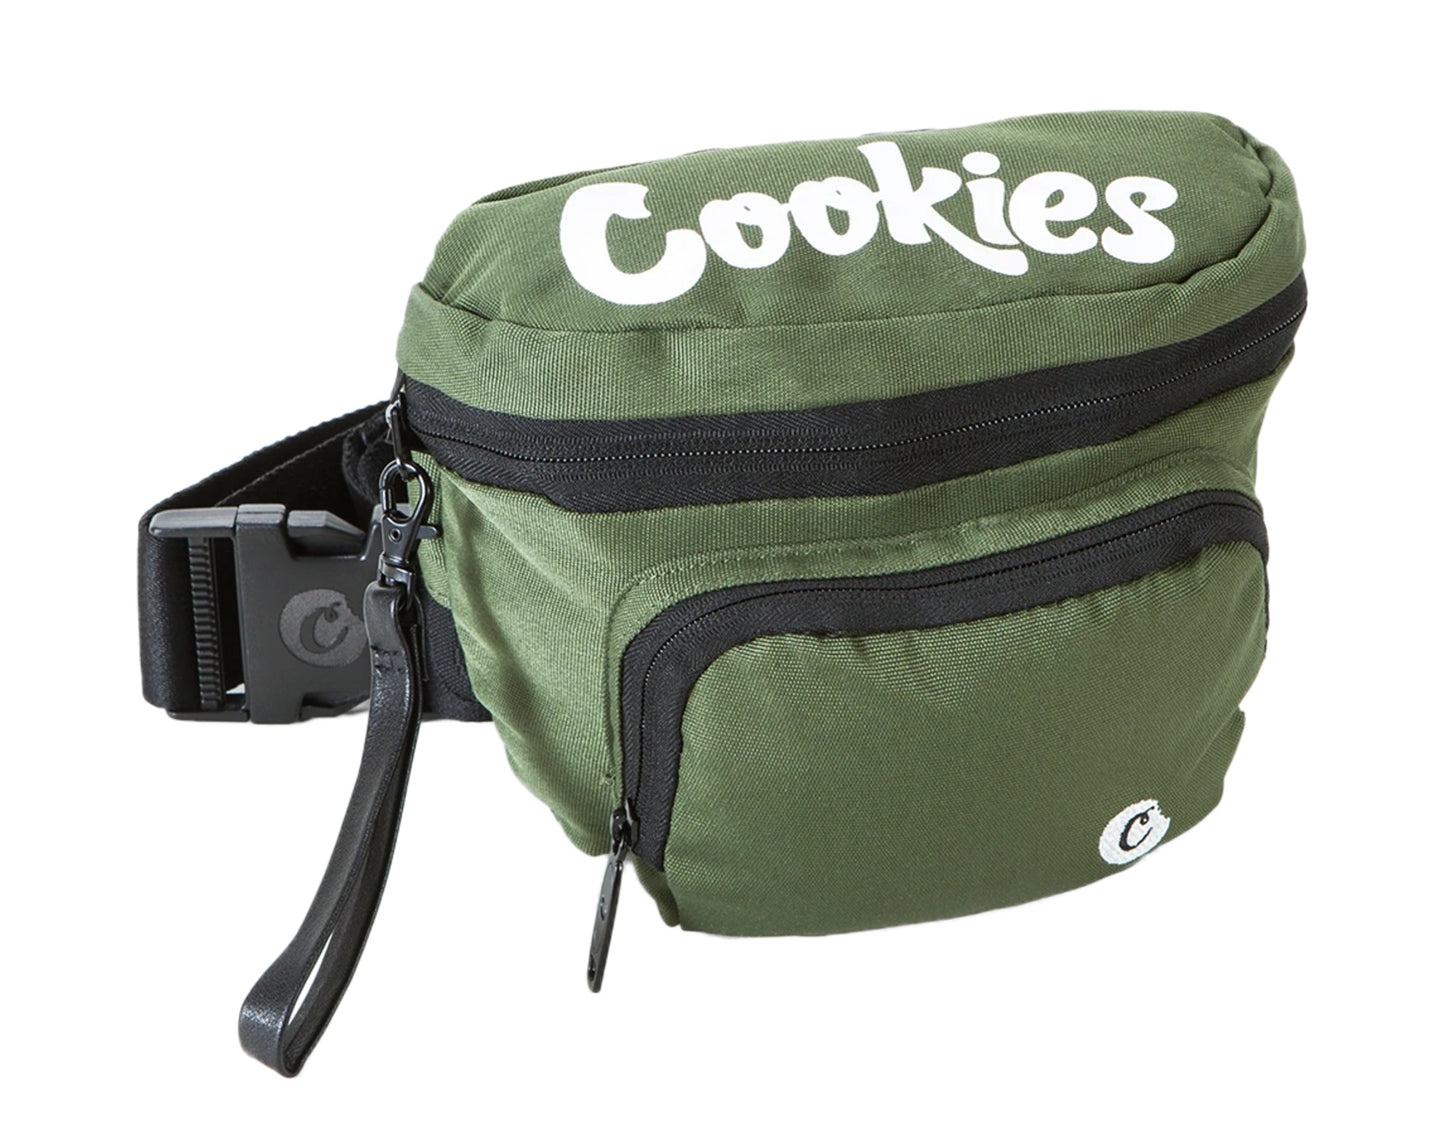 Cookies Environmental Nylon Smell Proof Olive Fanny Pack 1546A4402-OLI